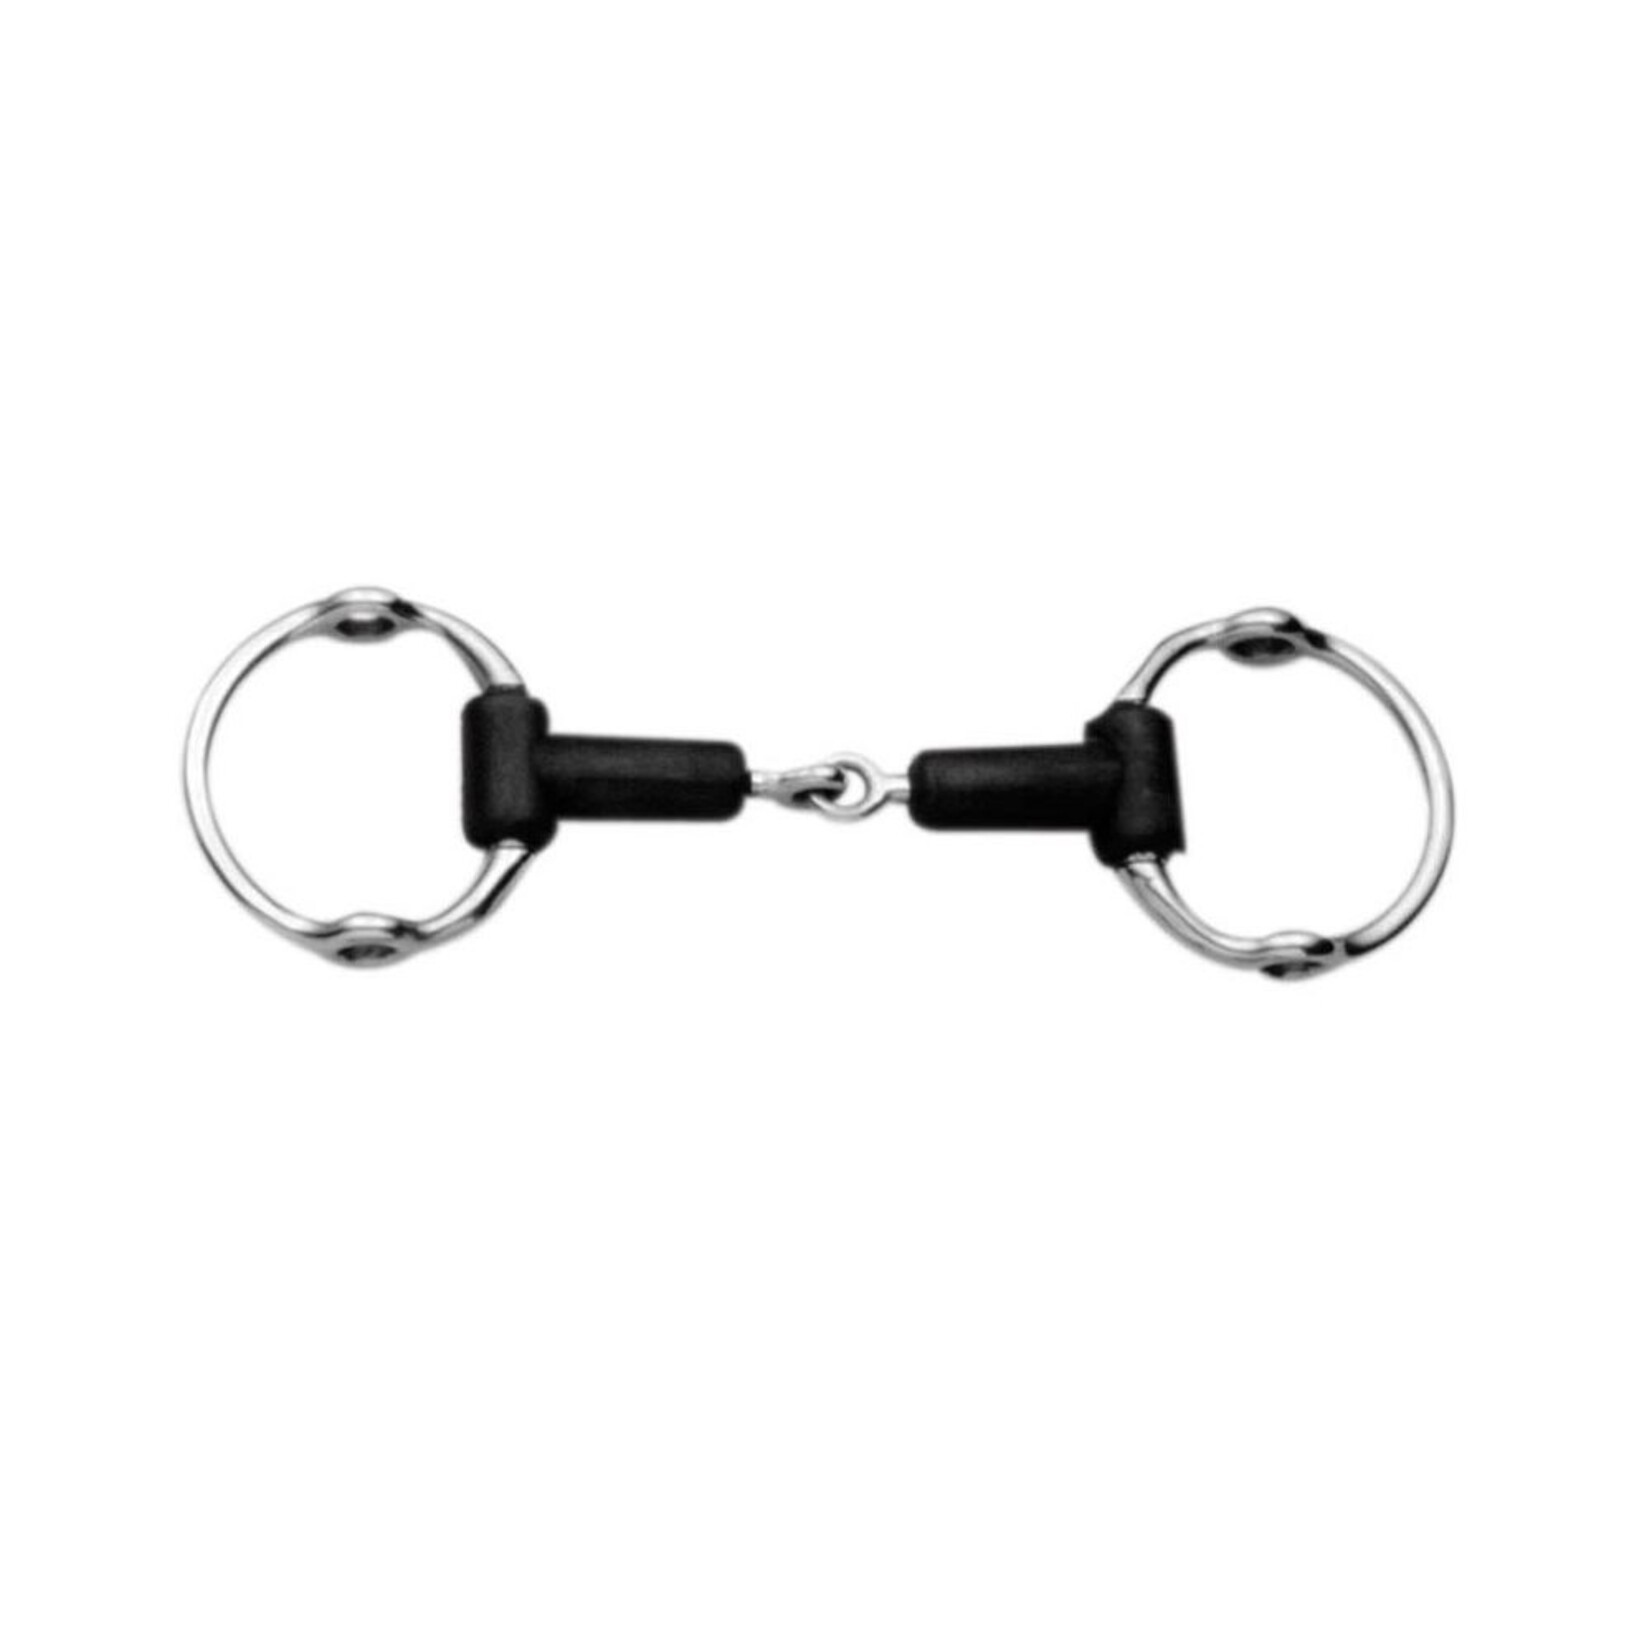 Shires Rubber Covered Gag